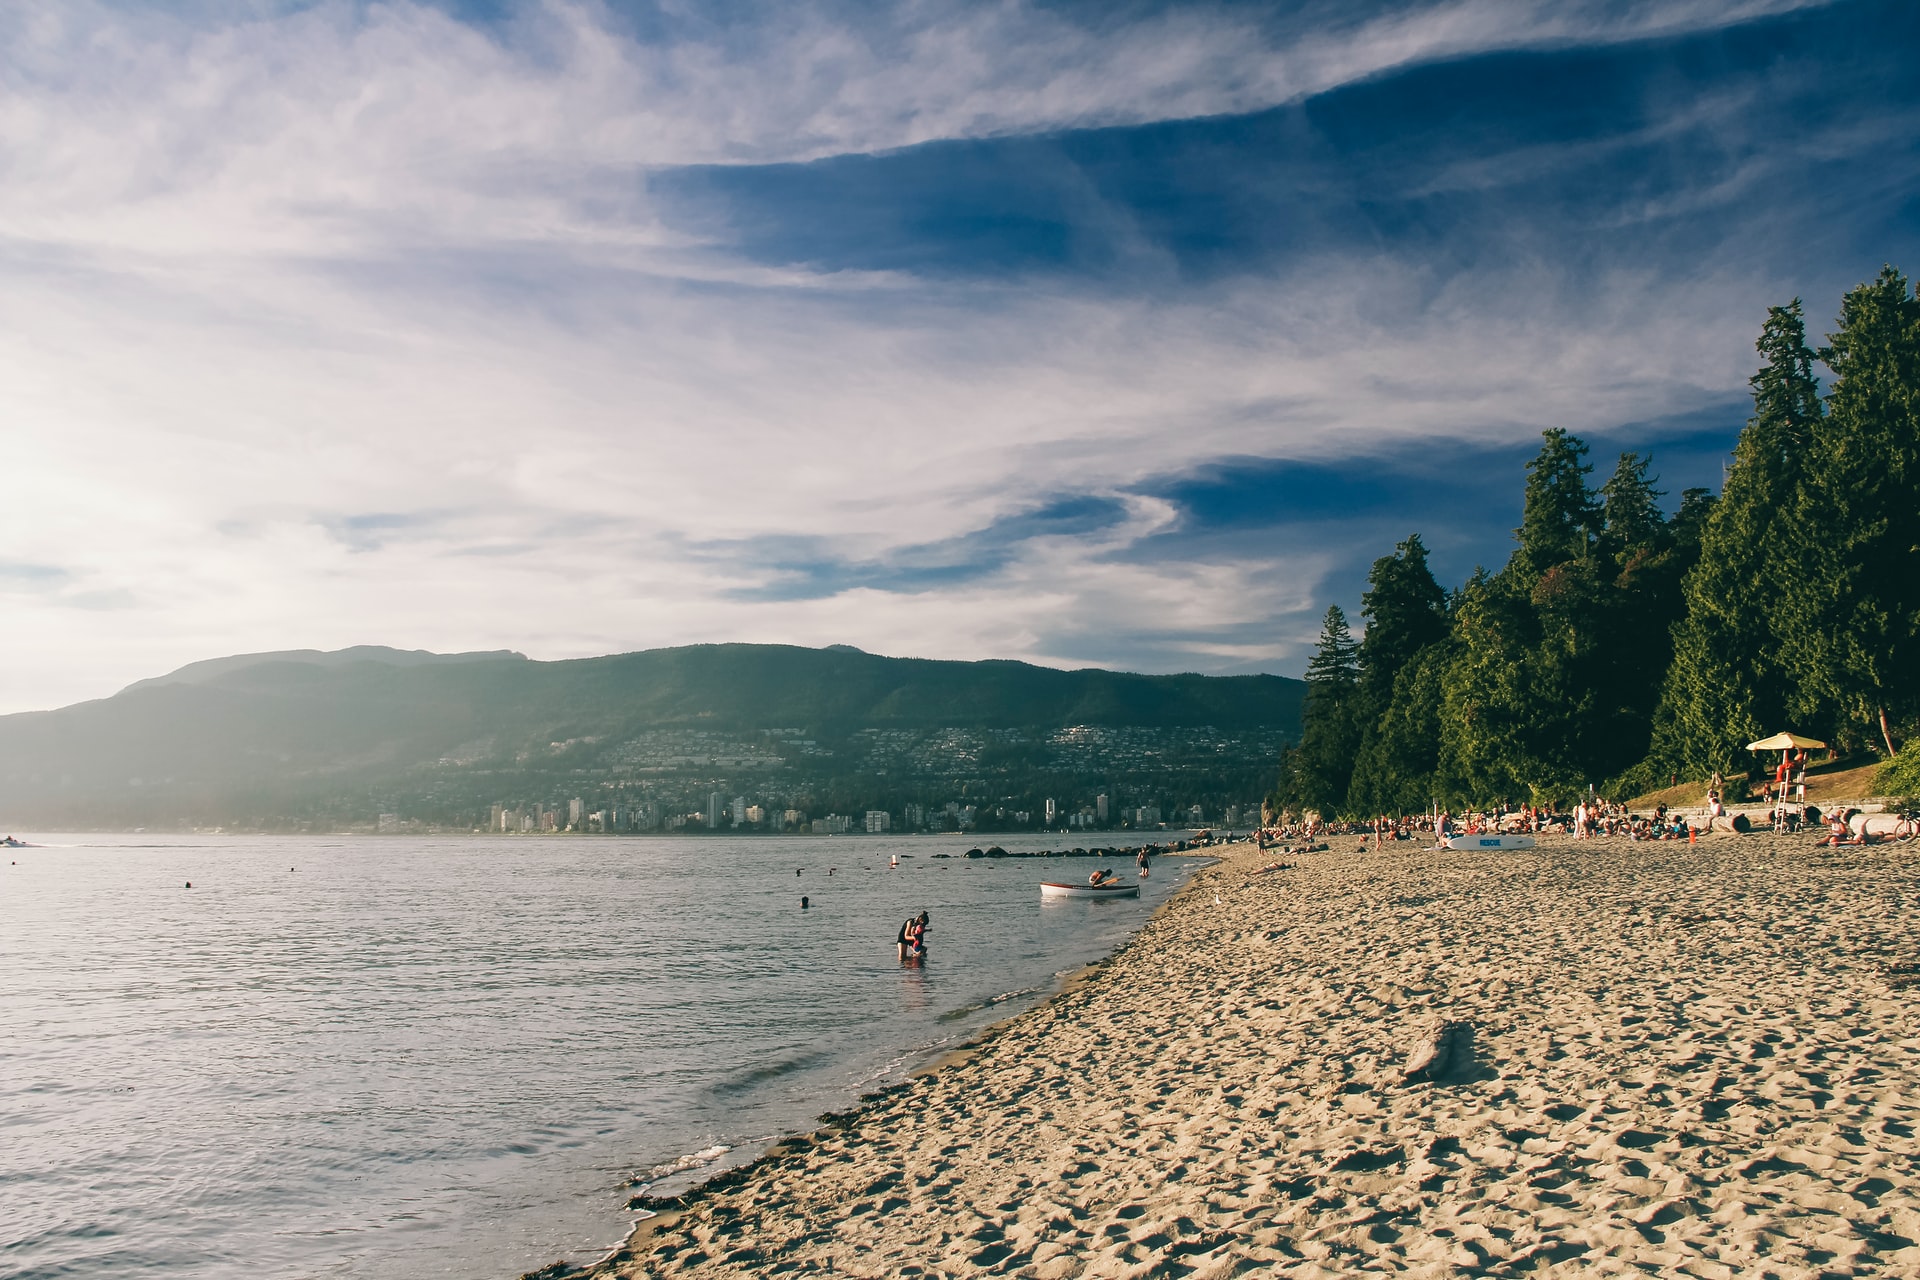 The beautiful sandy beach at Third Beach in Vancouver